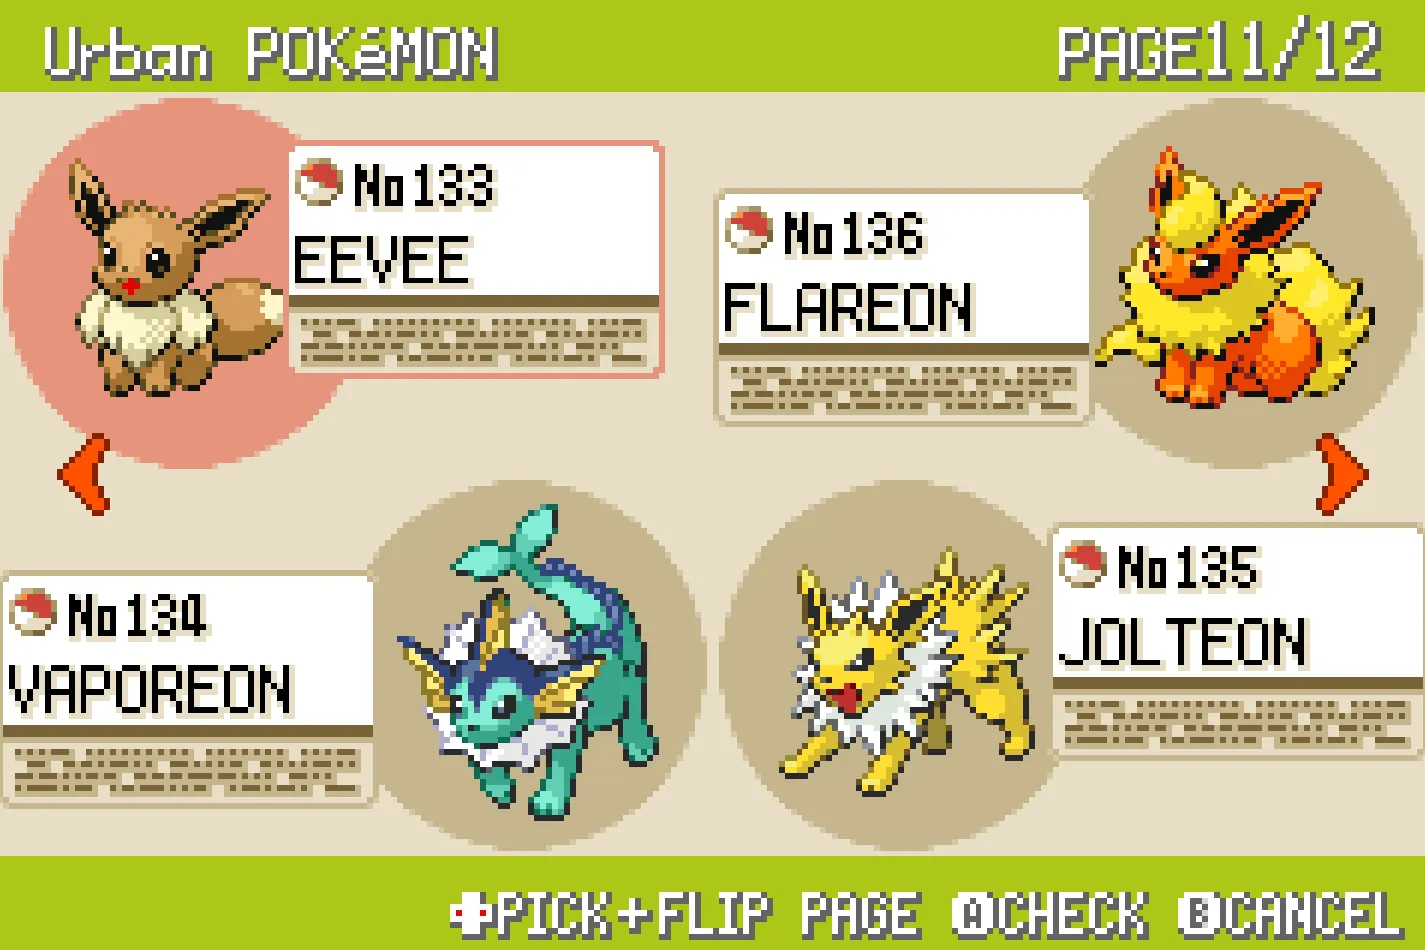 babalola stephen recommends Jolteon Moveset Fire Red